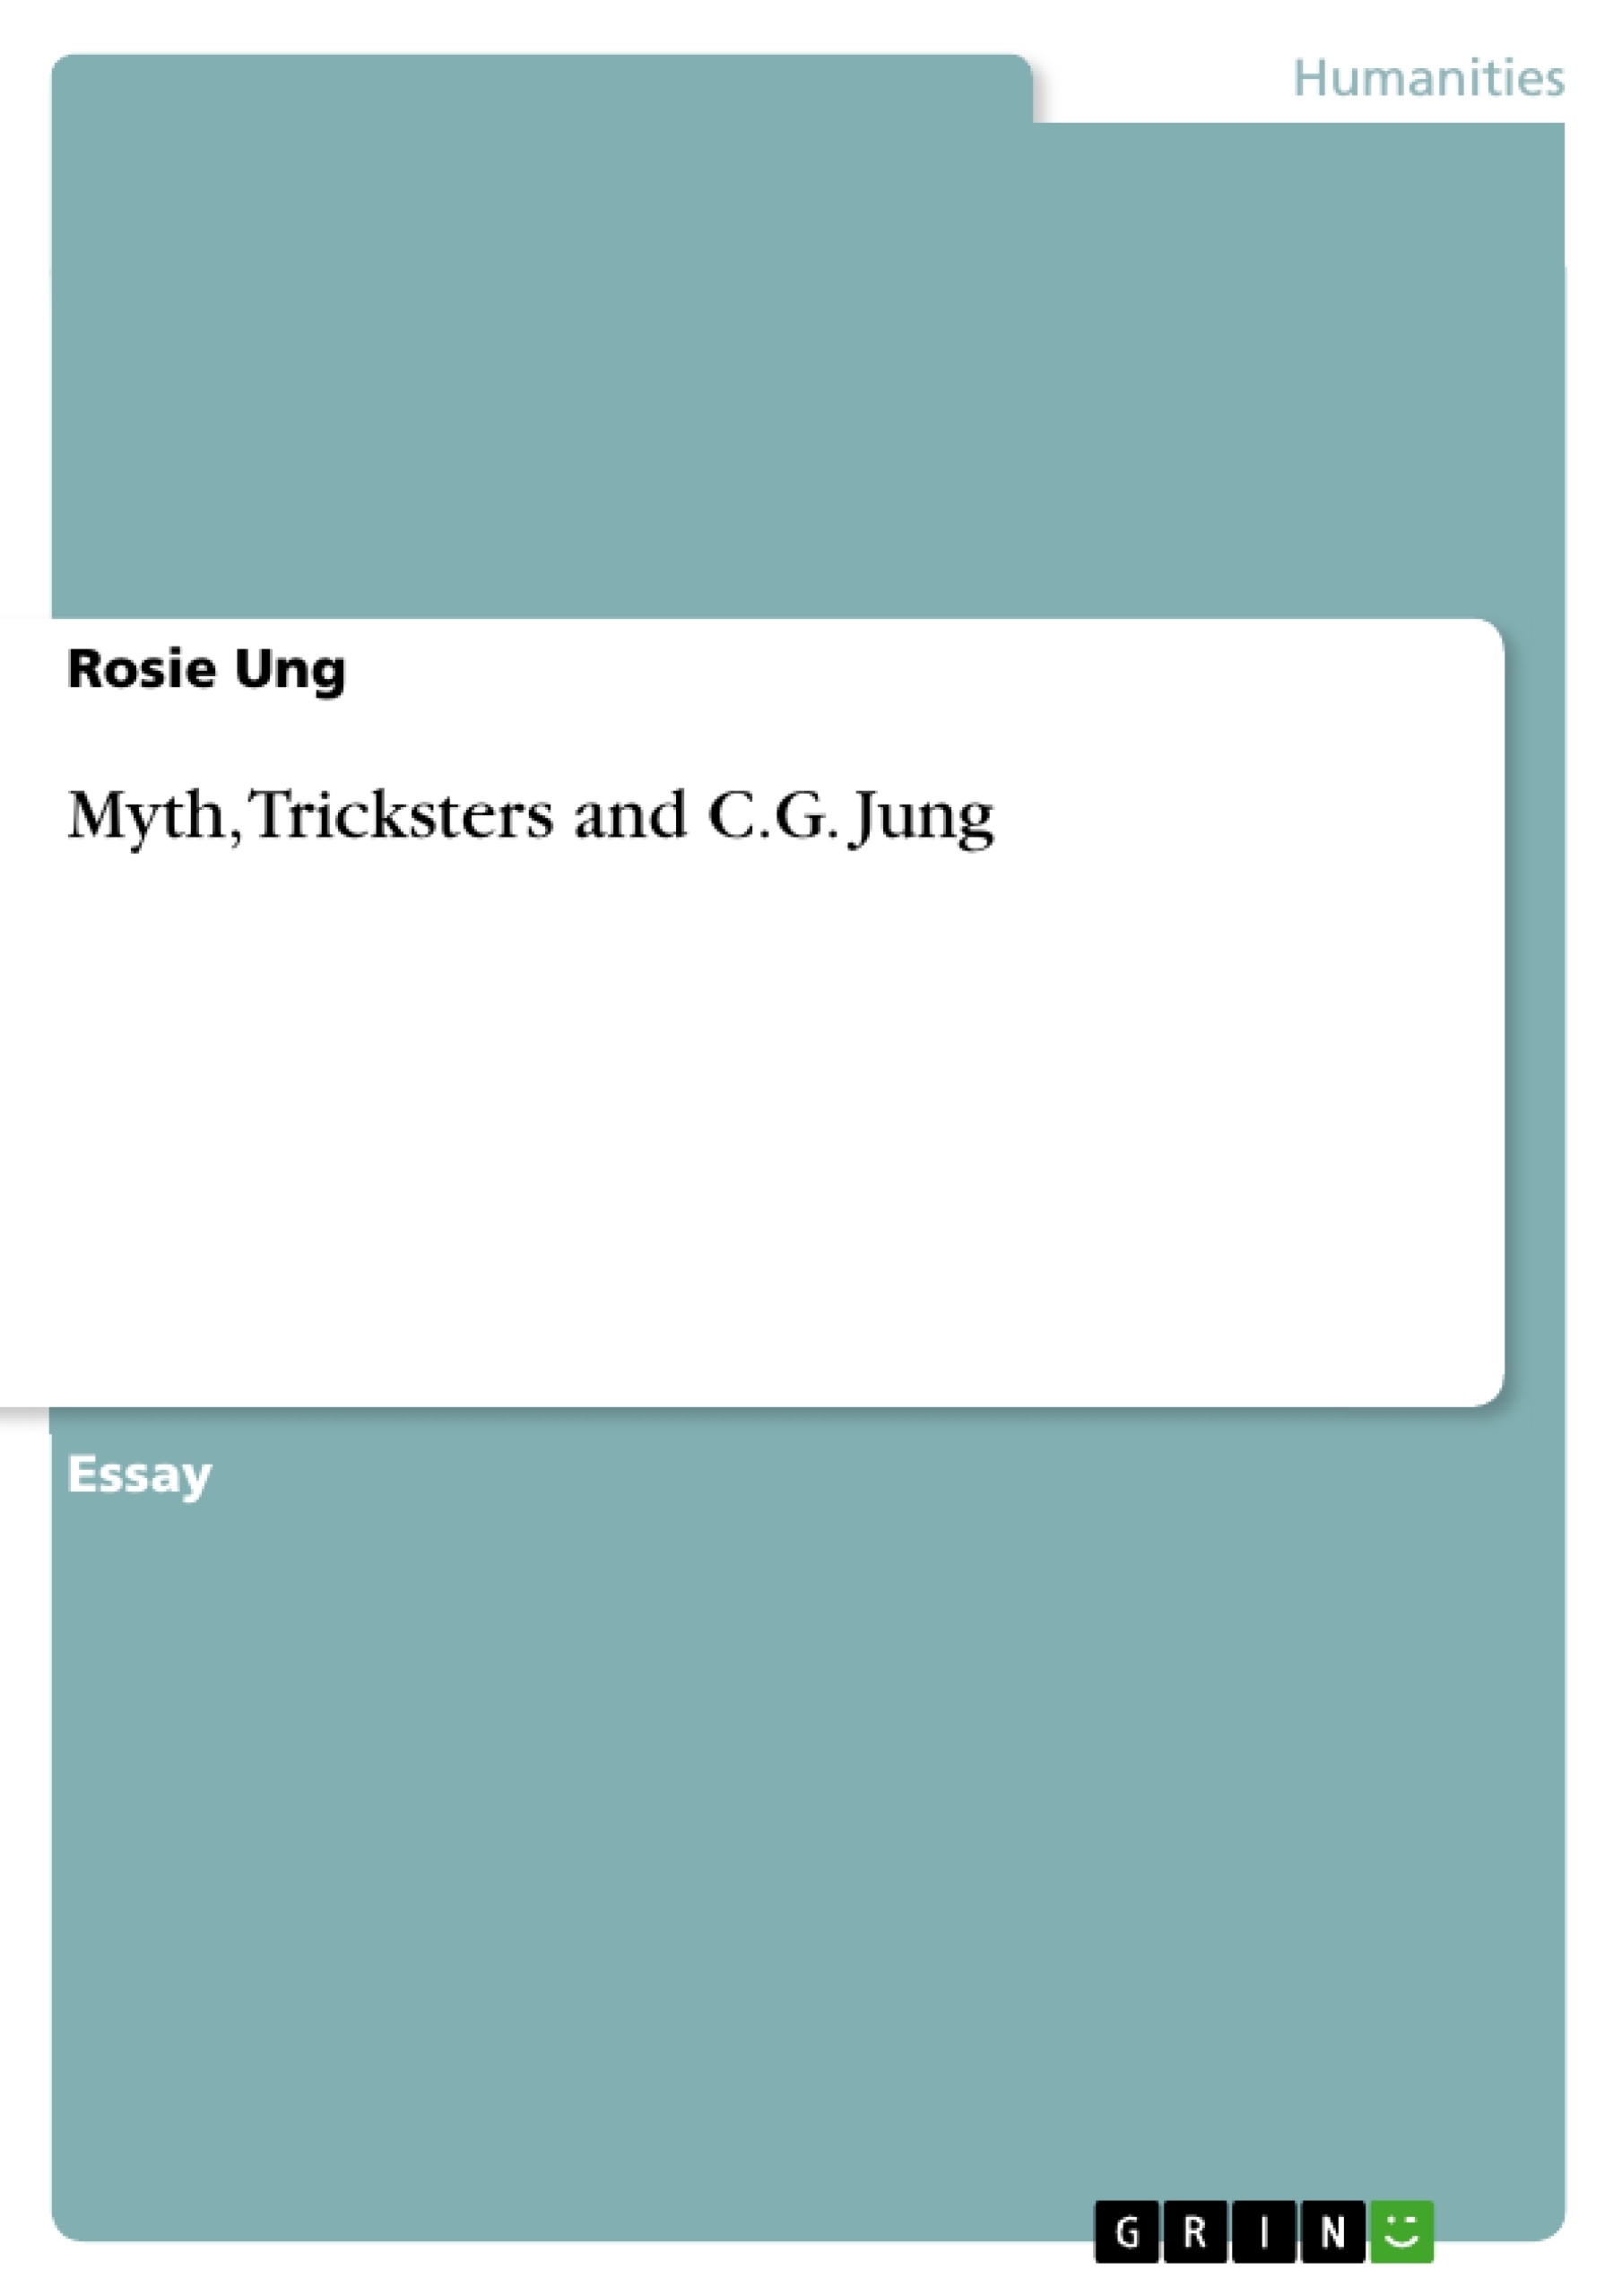 Título: Myth, Tricksters and C.G. Jung